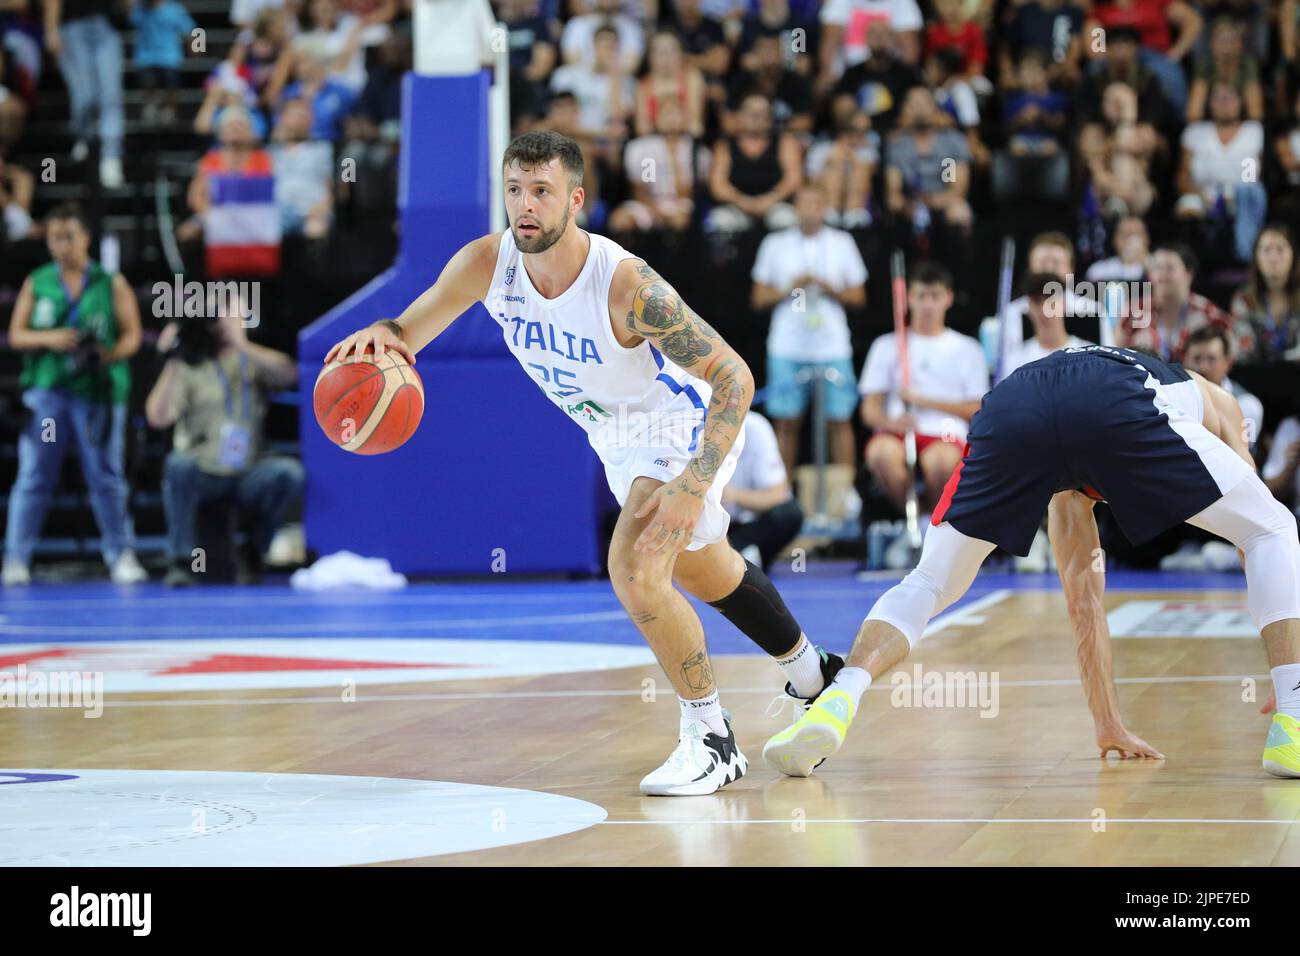 Montpellier, France. 16th Aug, 2022. Second match for the France Basket  team vs Italy in Montpellier as preparing for Eurobasket 2022. The winner  is France 100 - 68 (Photo by Norberto Maccagno/Pacific